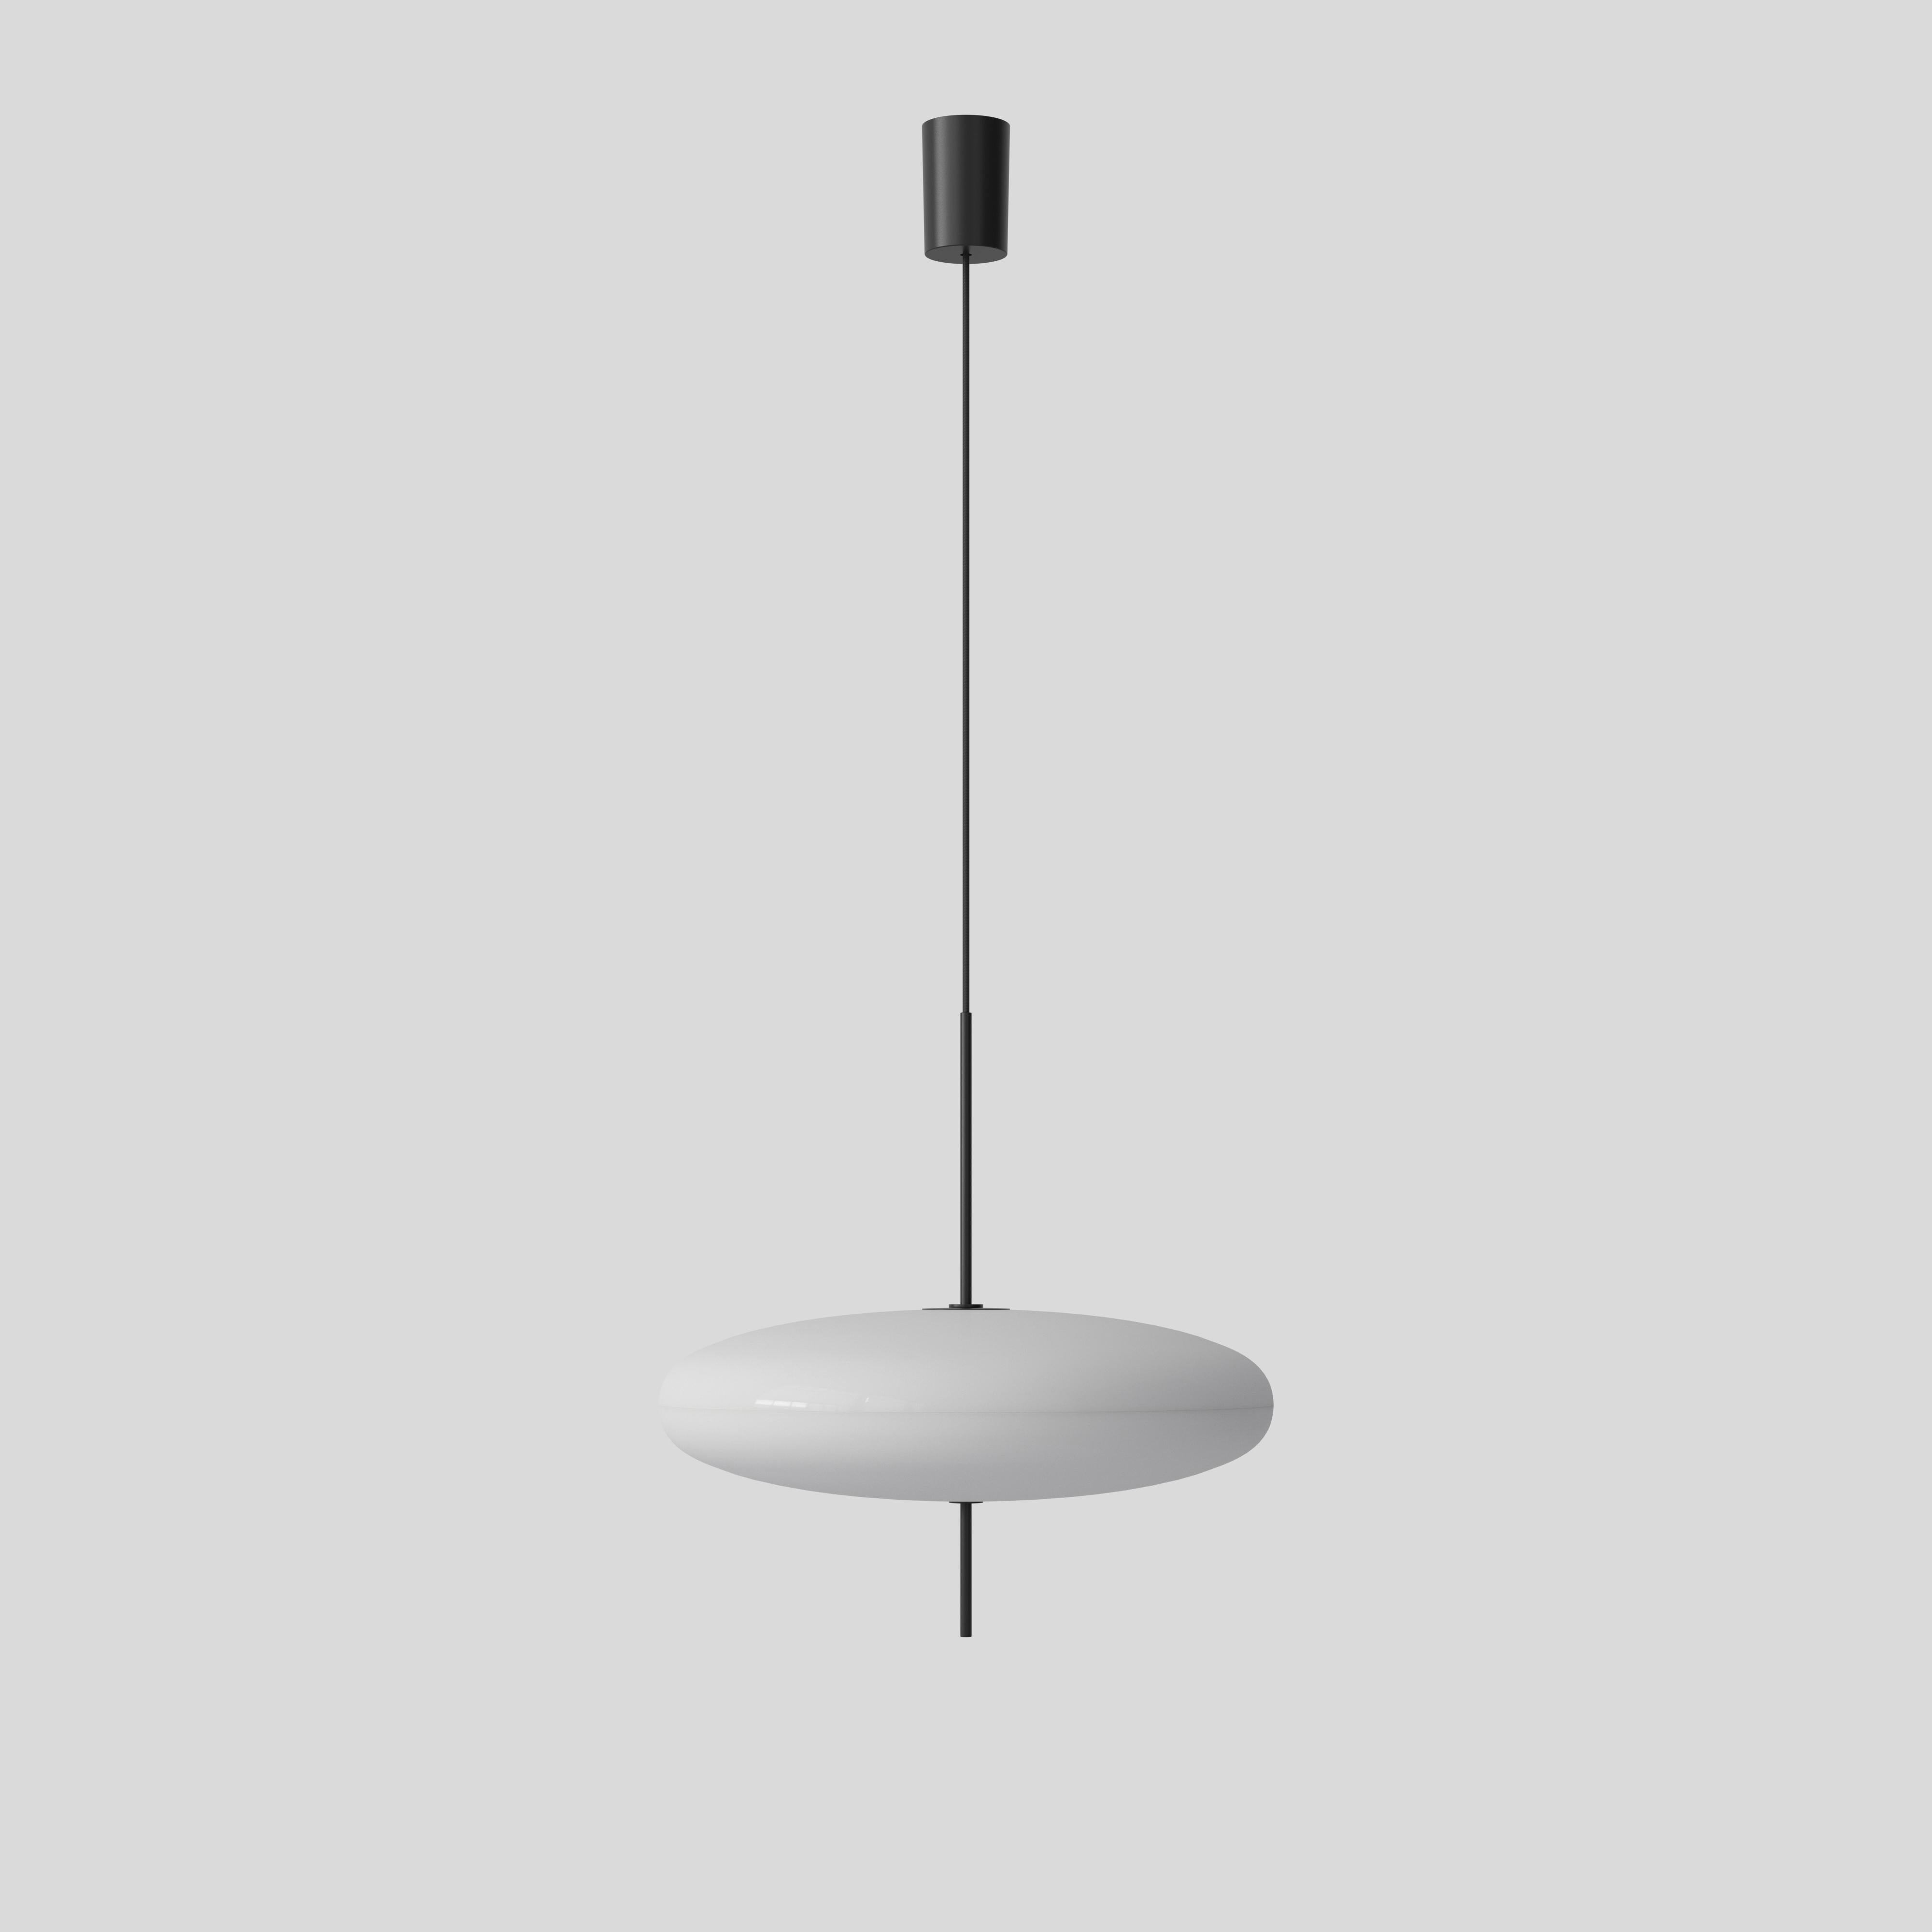 Gino Sarfatti lamp model 2065.
White diffuser, black hardware, black cable.
Manufactured by Astep

Model 2065
Design by Gino Sarfatti
The 2065 is made of two joined opaline methacrylate saucer-shaped diffusers suspended from the ceiling with a black